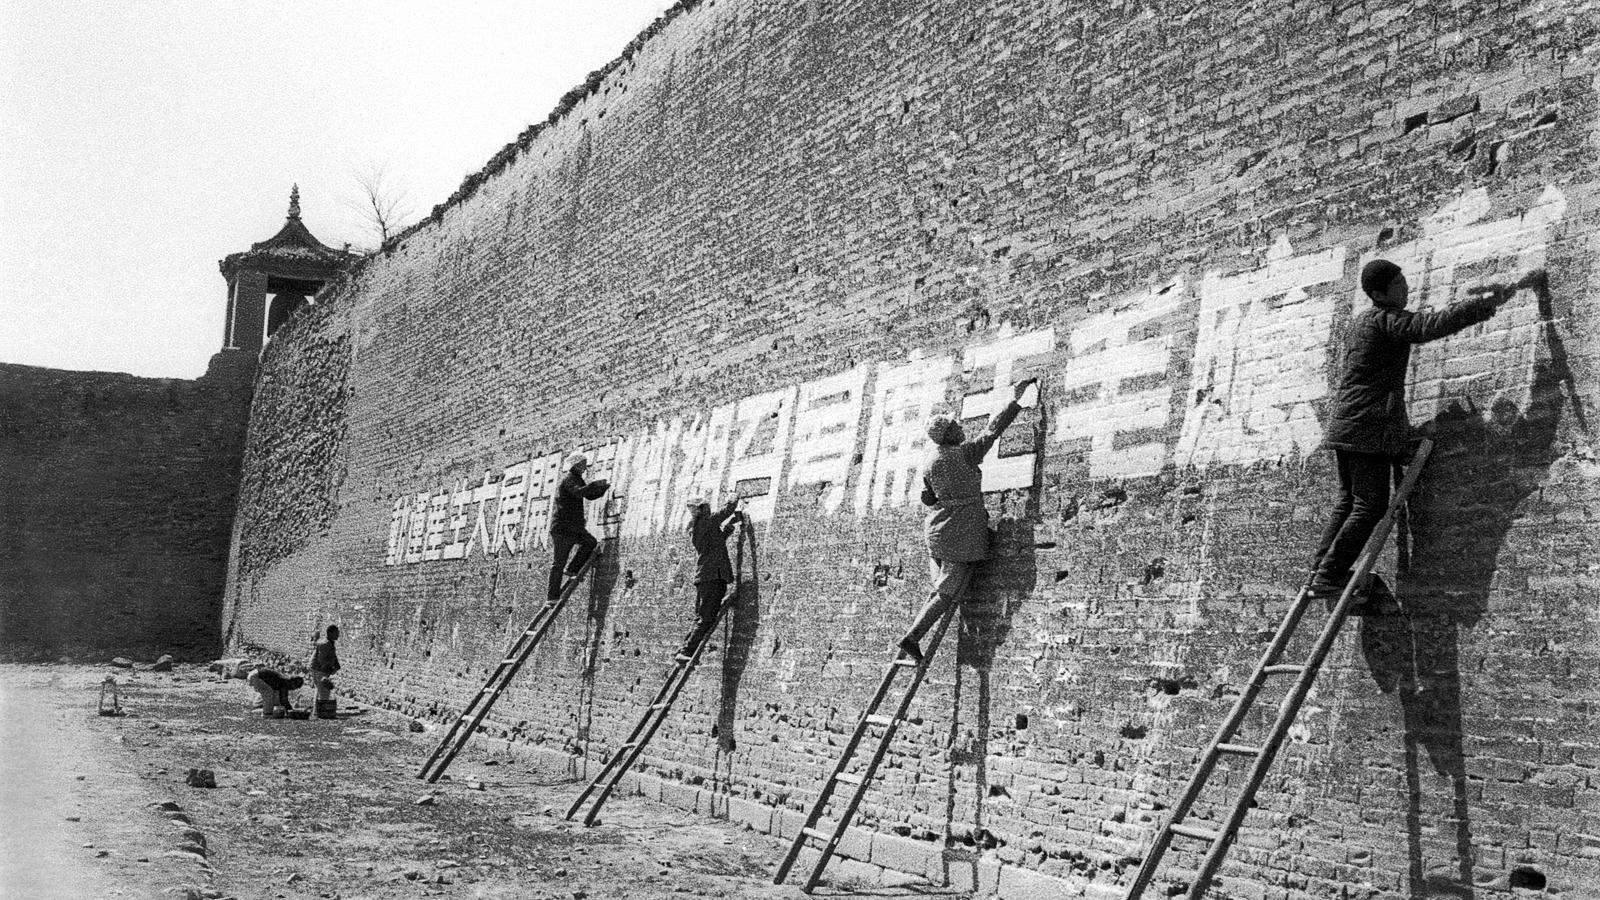 Workers Painting Political Slogans on the City Wall of Lingshou, Shanxi Province, 1945